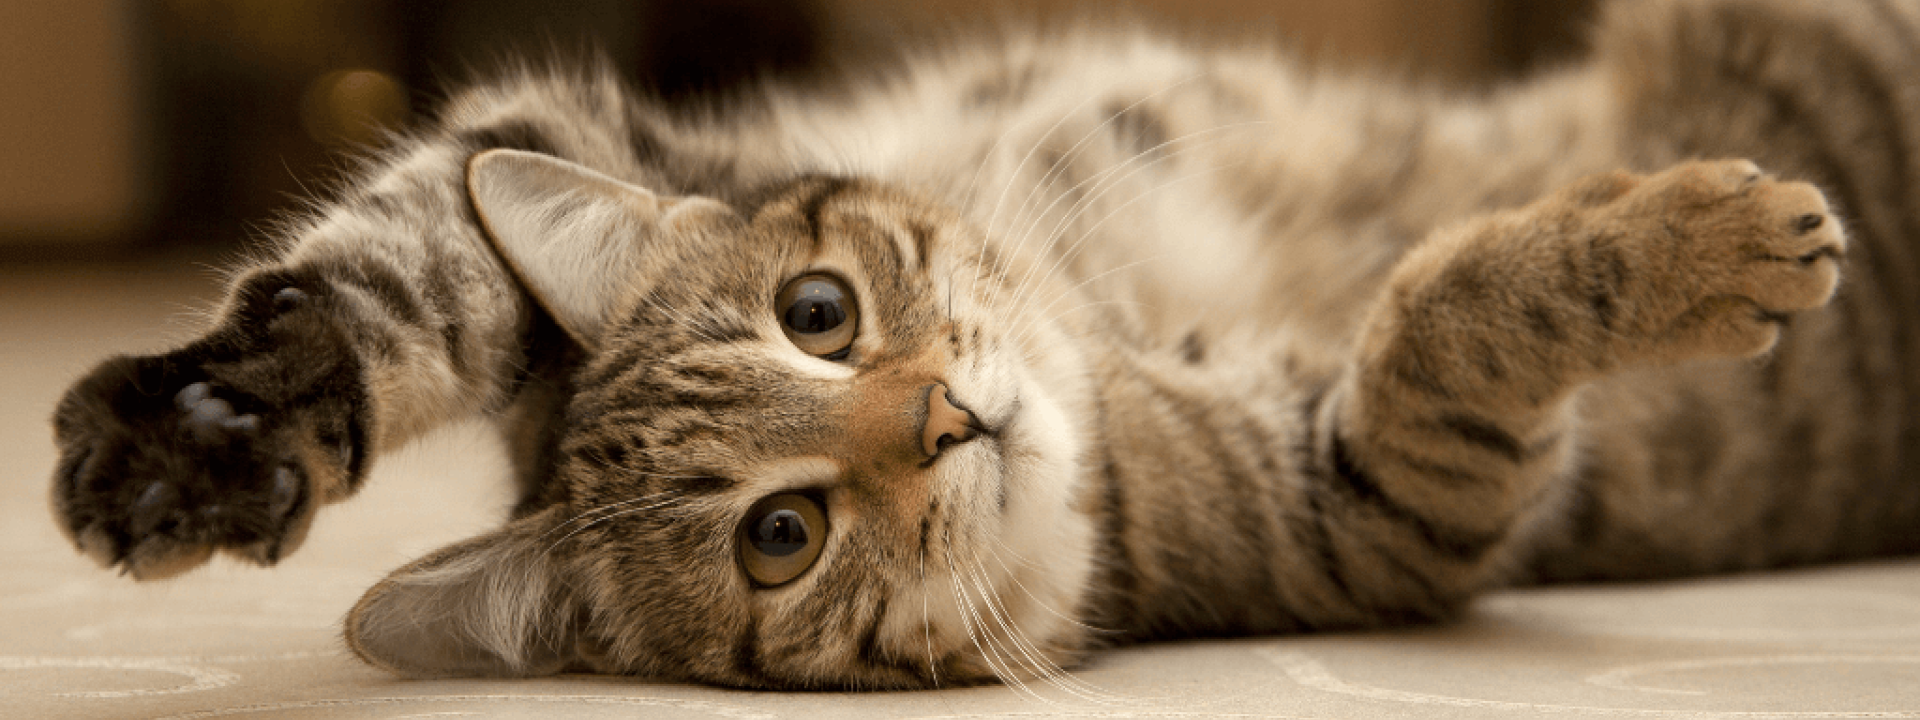 myths about cats your vet wants you to know